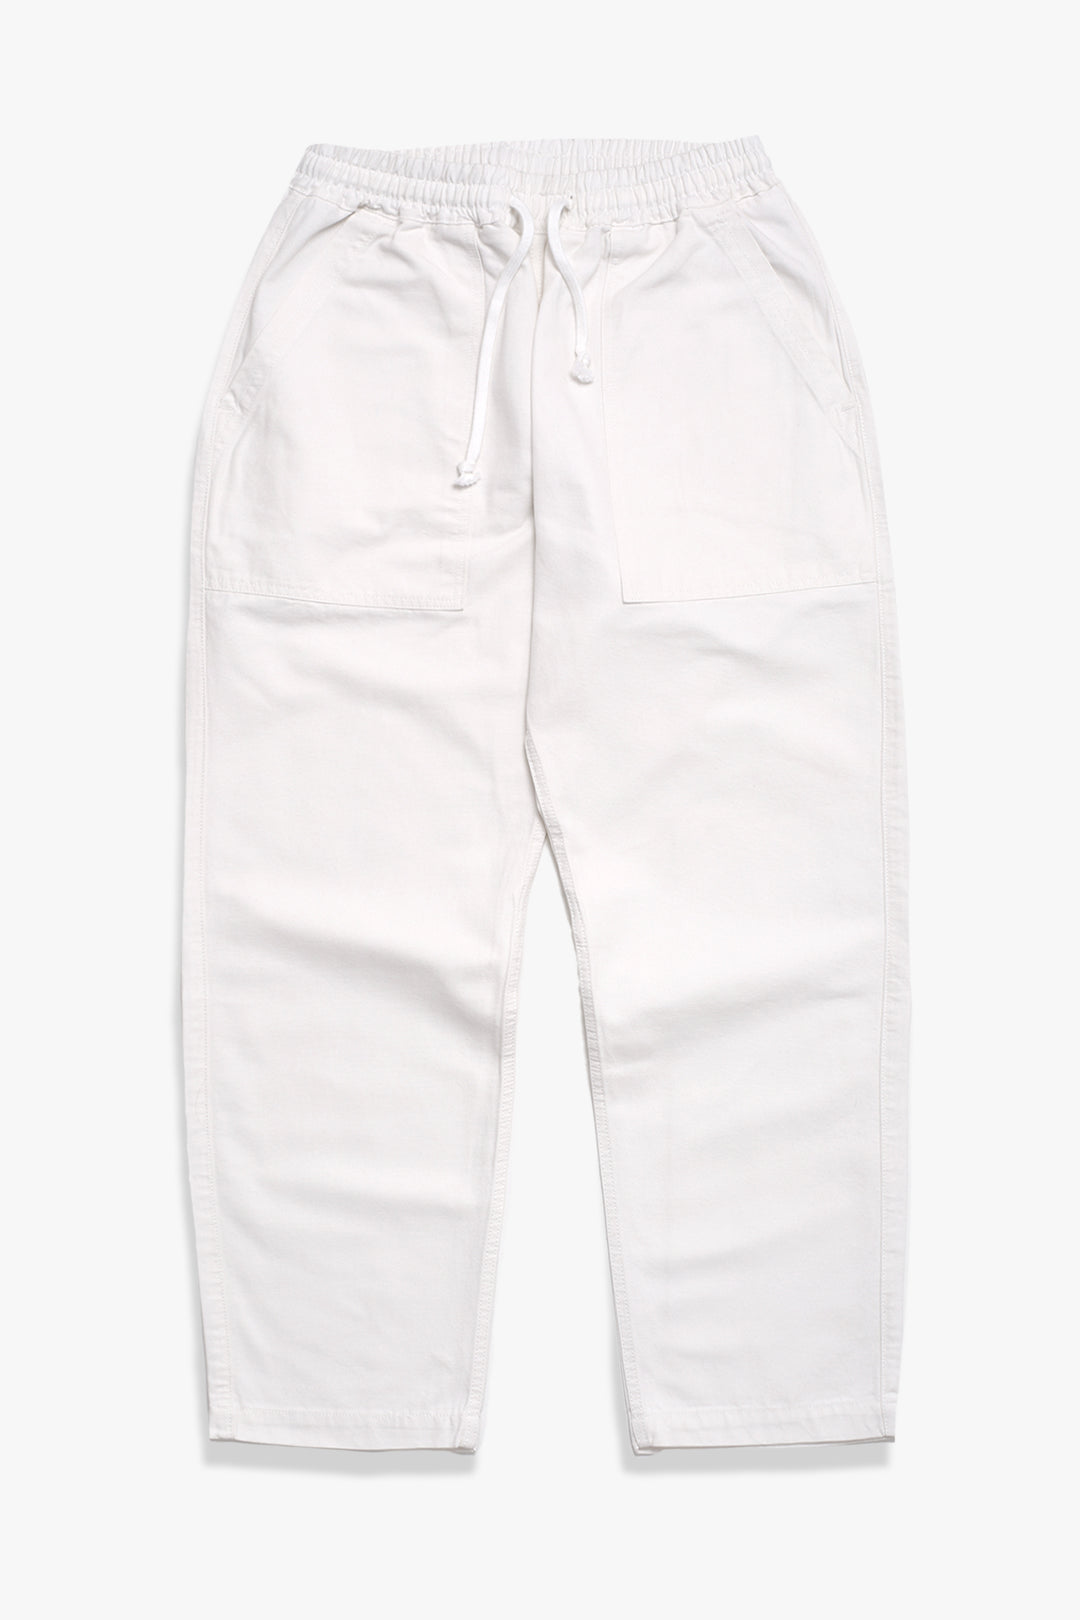 Service Works - Classic Chef Pants - Off-White